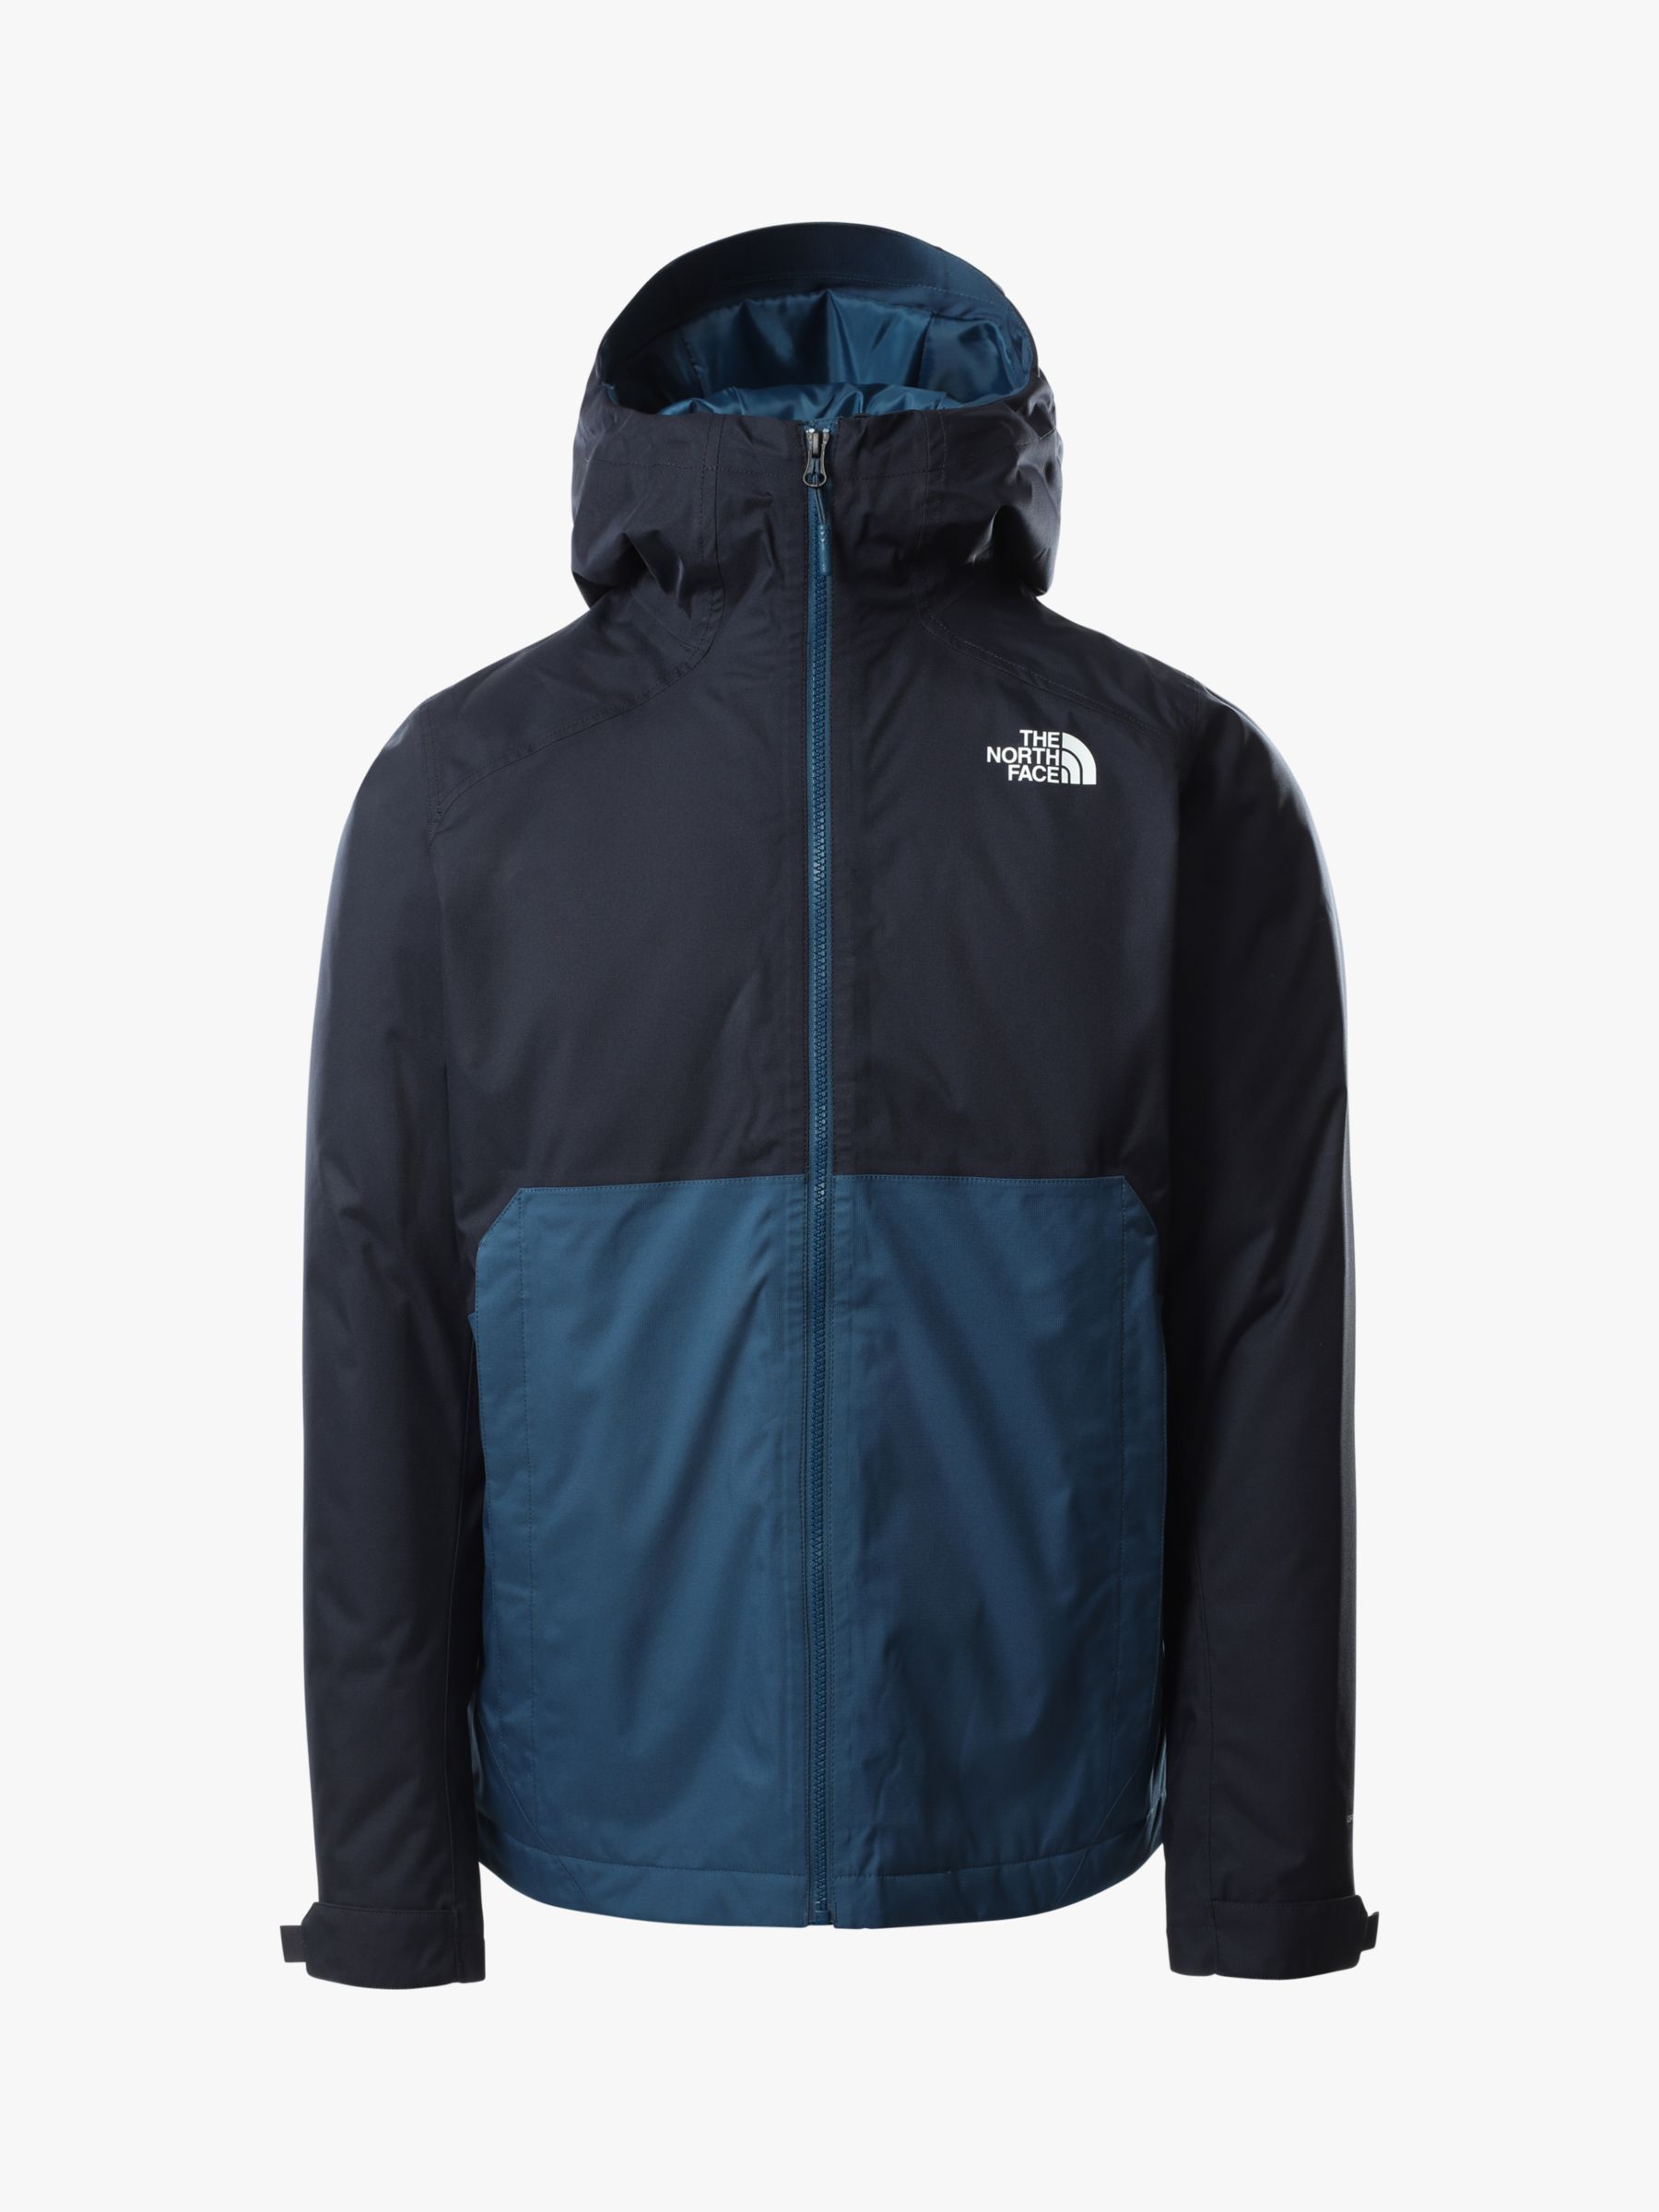 The North Face Millerton Insulated Men's Waterproof Jacket